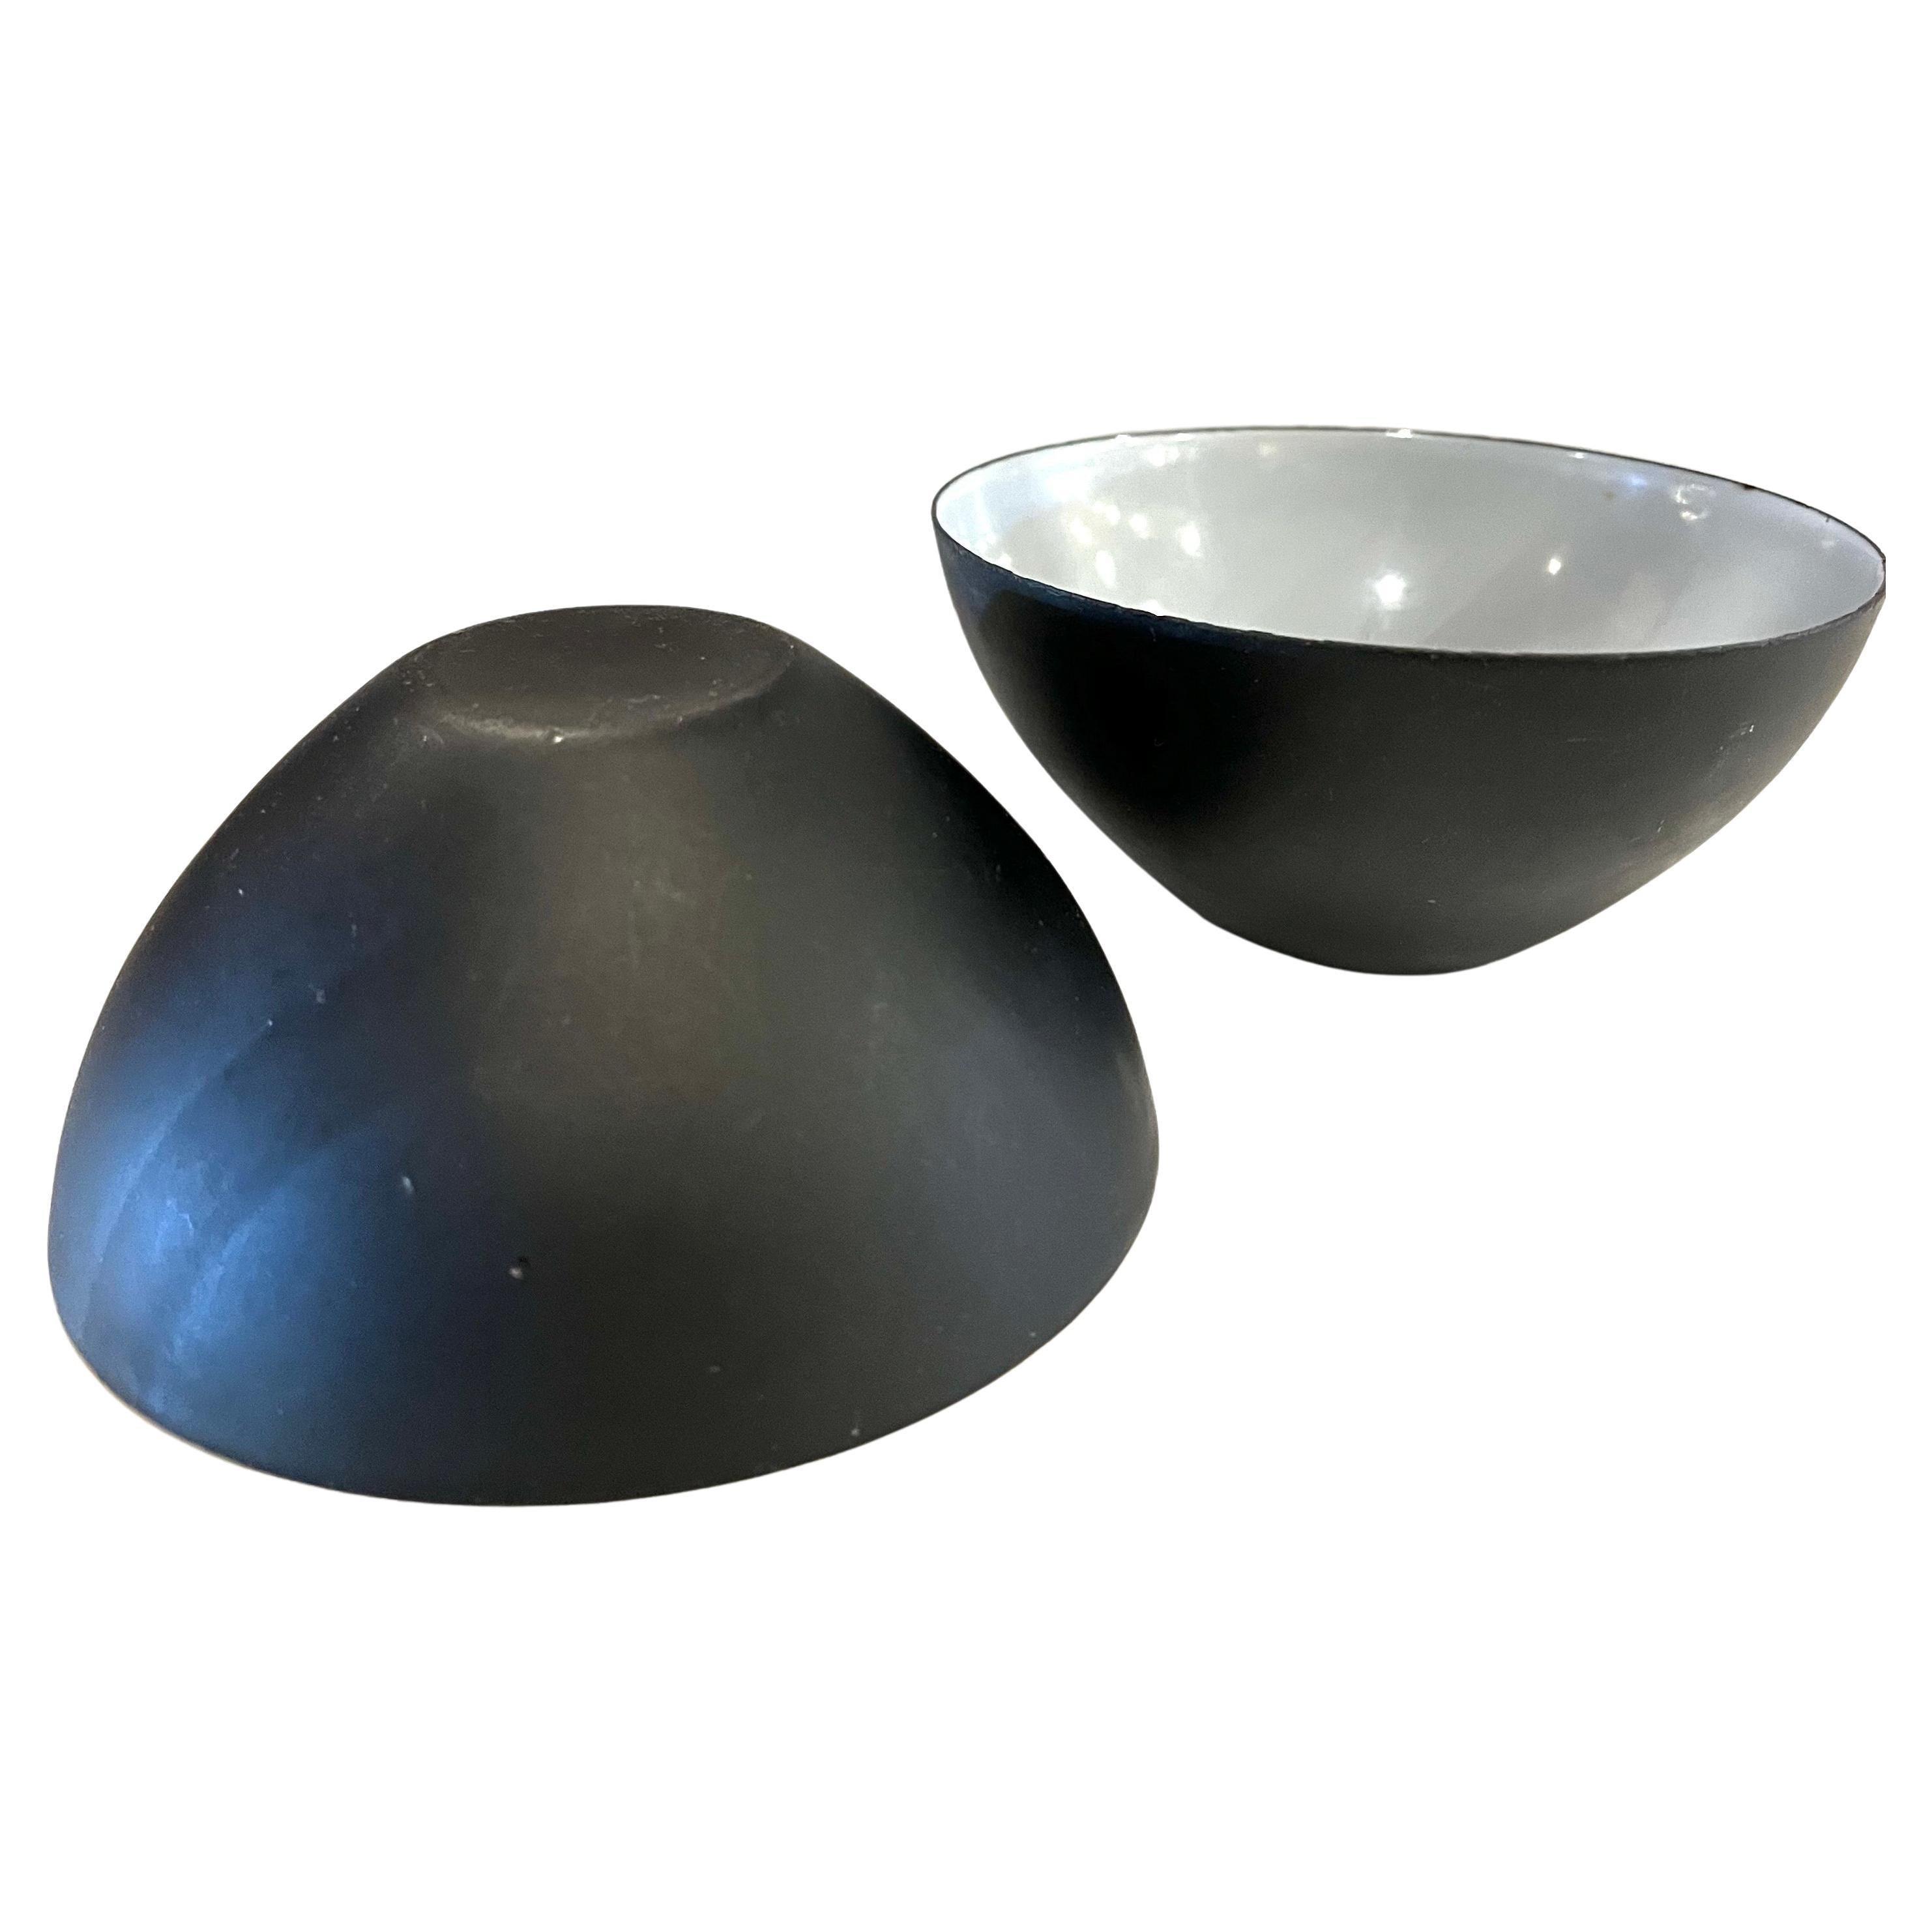 Beautiful color and nice condition on this pair of vintage metal enamel Krenit bowls, designed by Herbert Krenchel for Torben Orskov, circa the 1950s, great condition. With light wear on the outside. and a light grey shade on the inside.